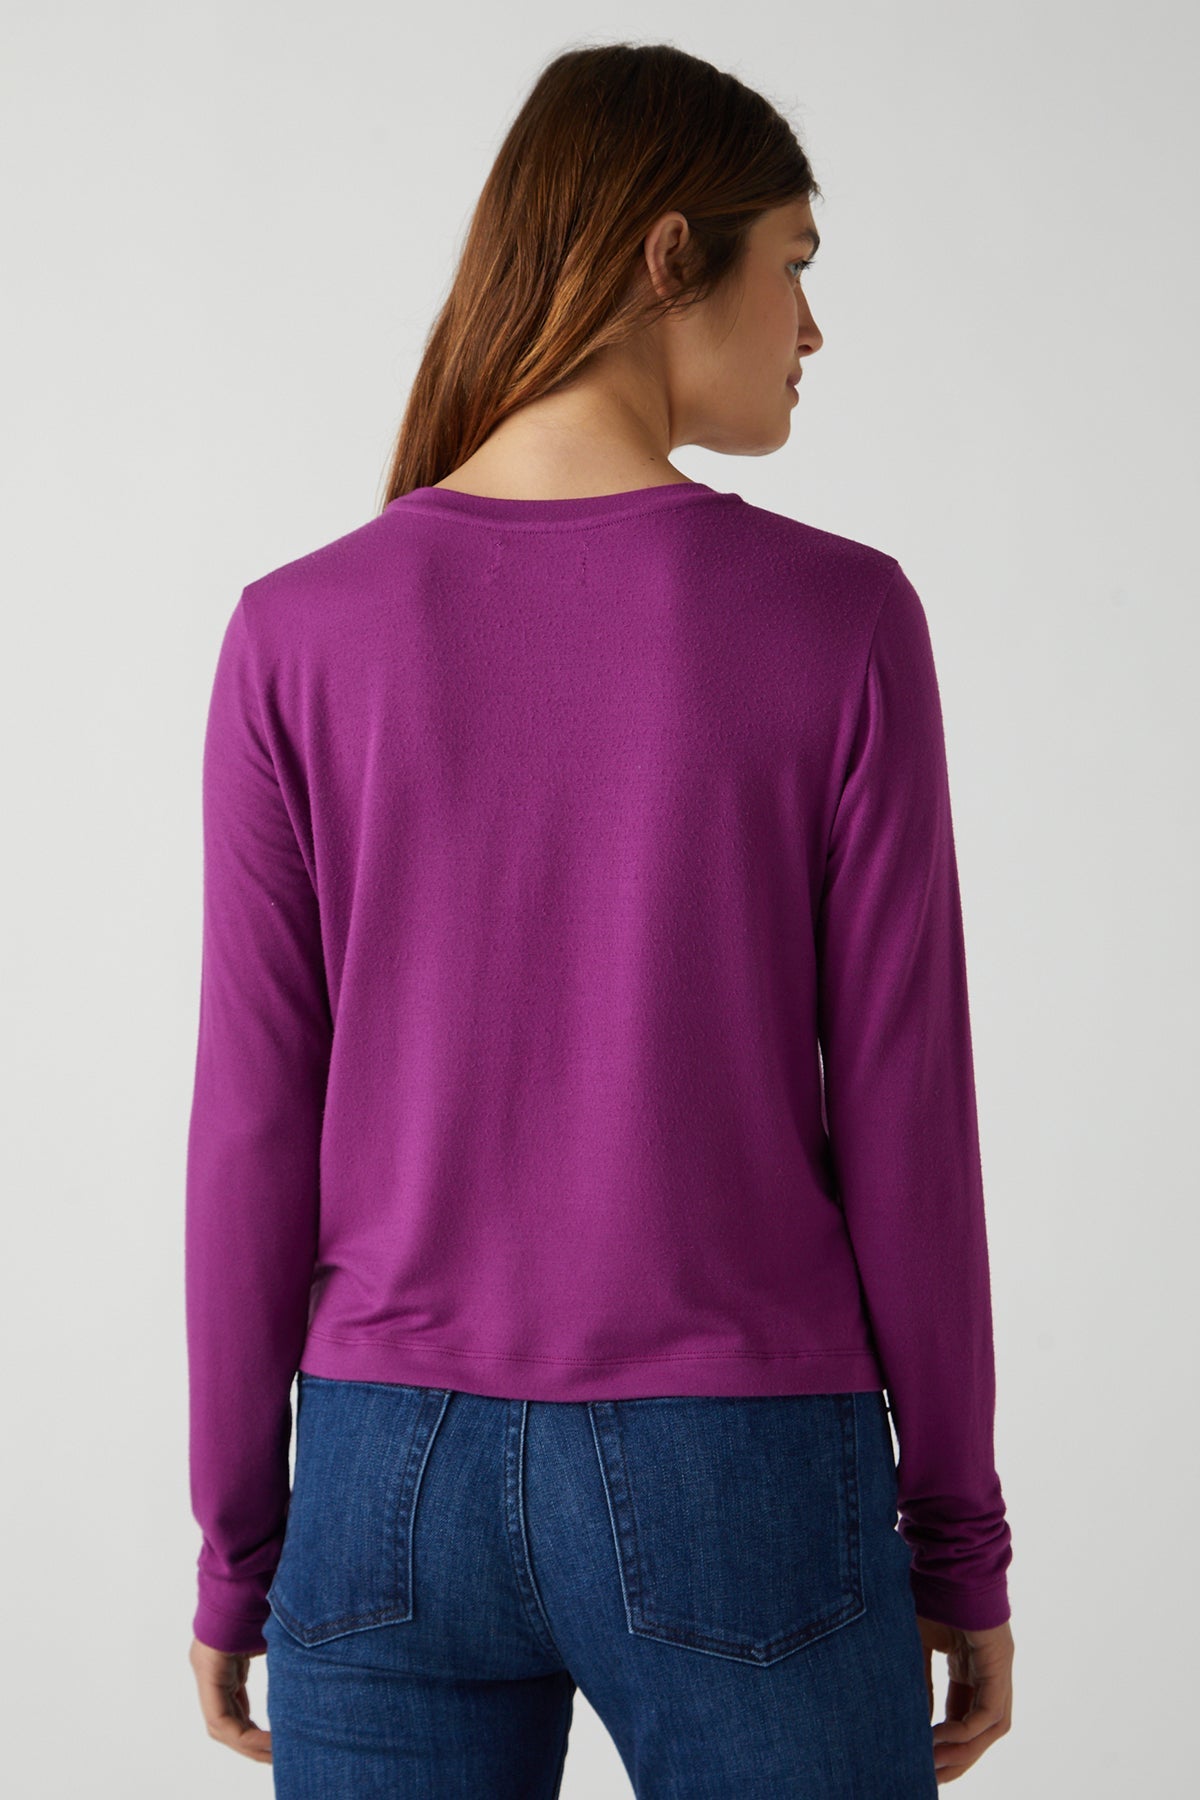 The back view of a woman wearing a Purple Pacifica Tee by Velvet by Jenny Graham and jeans.-26413773881537